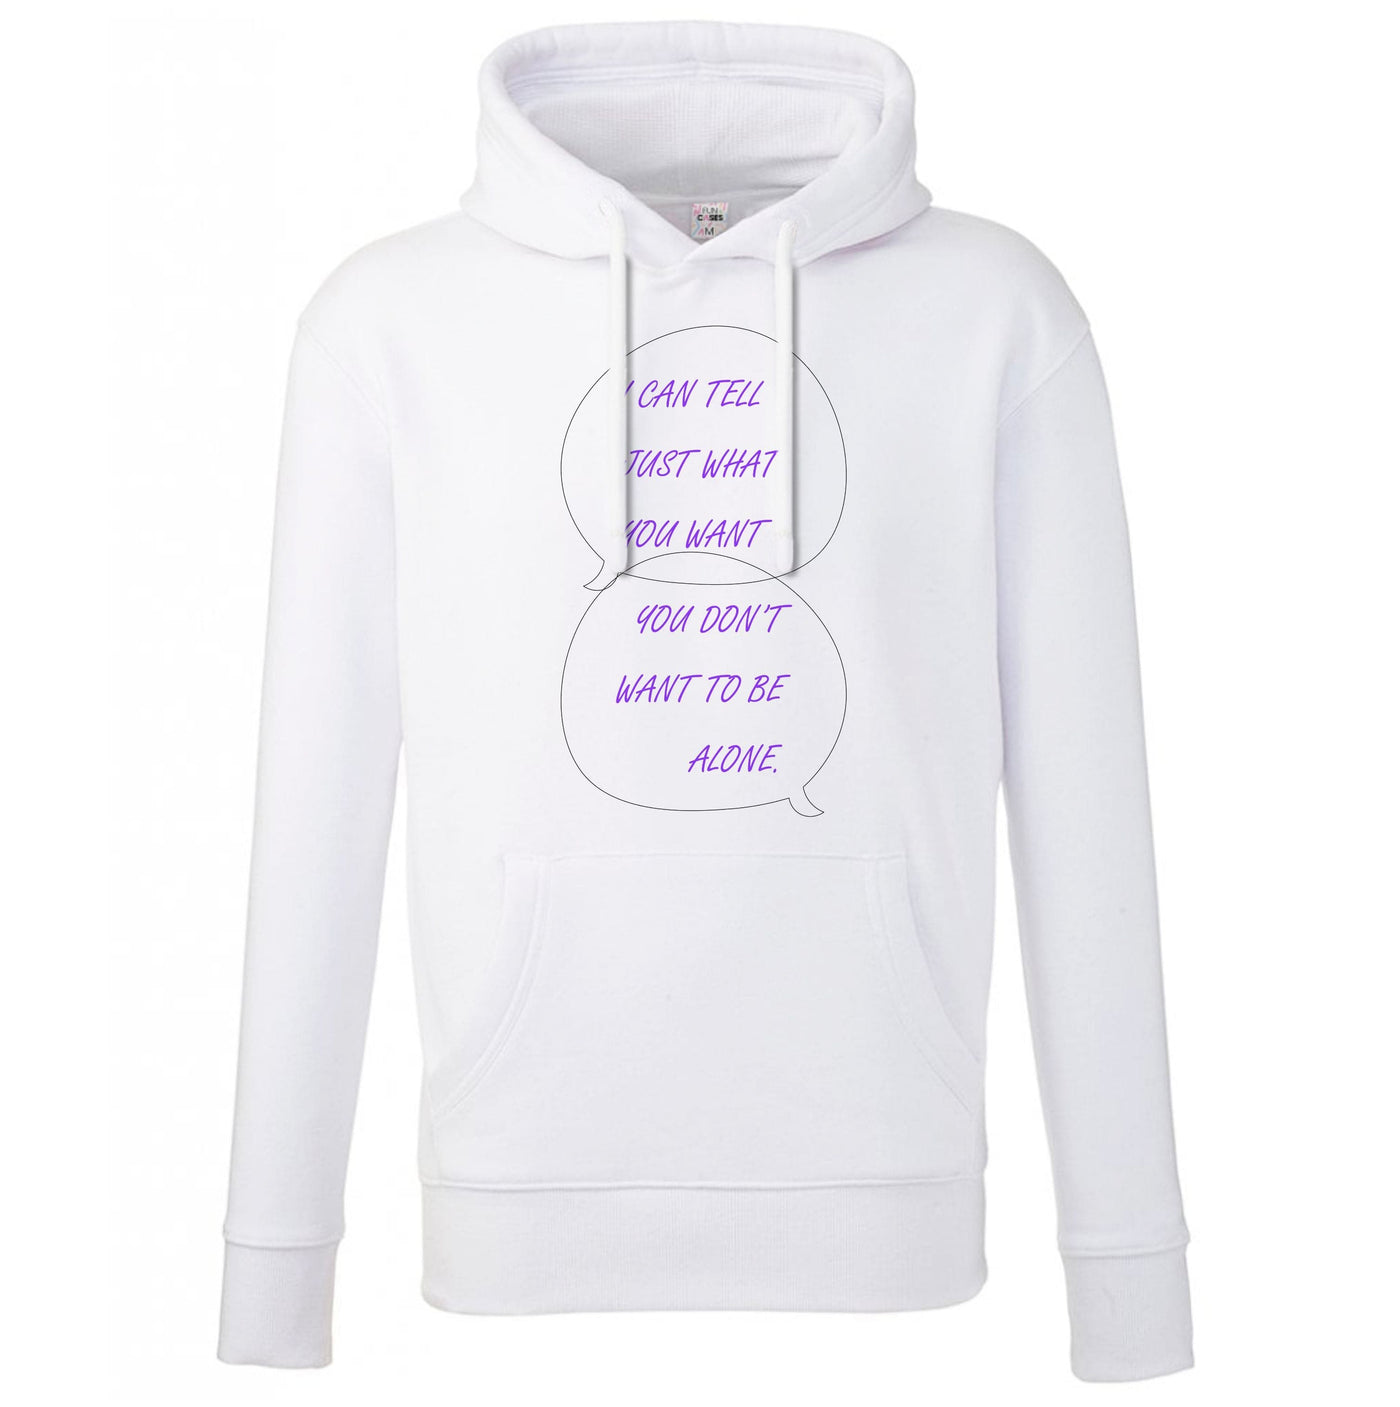 You Don't Want To Be Alone - Festival Hoodie